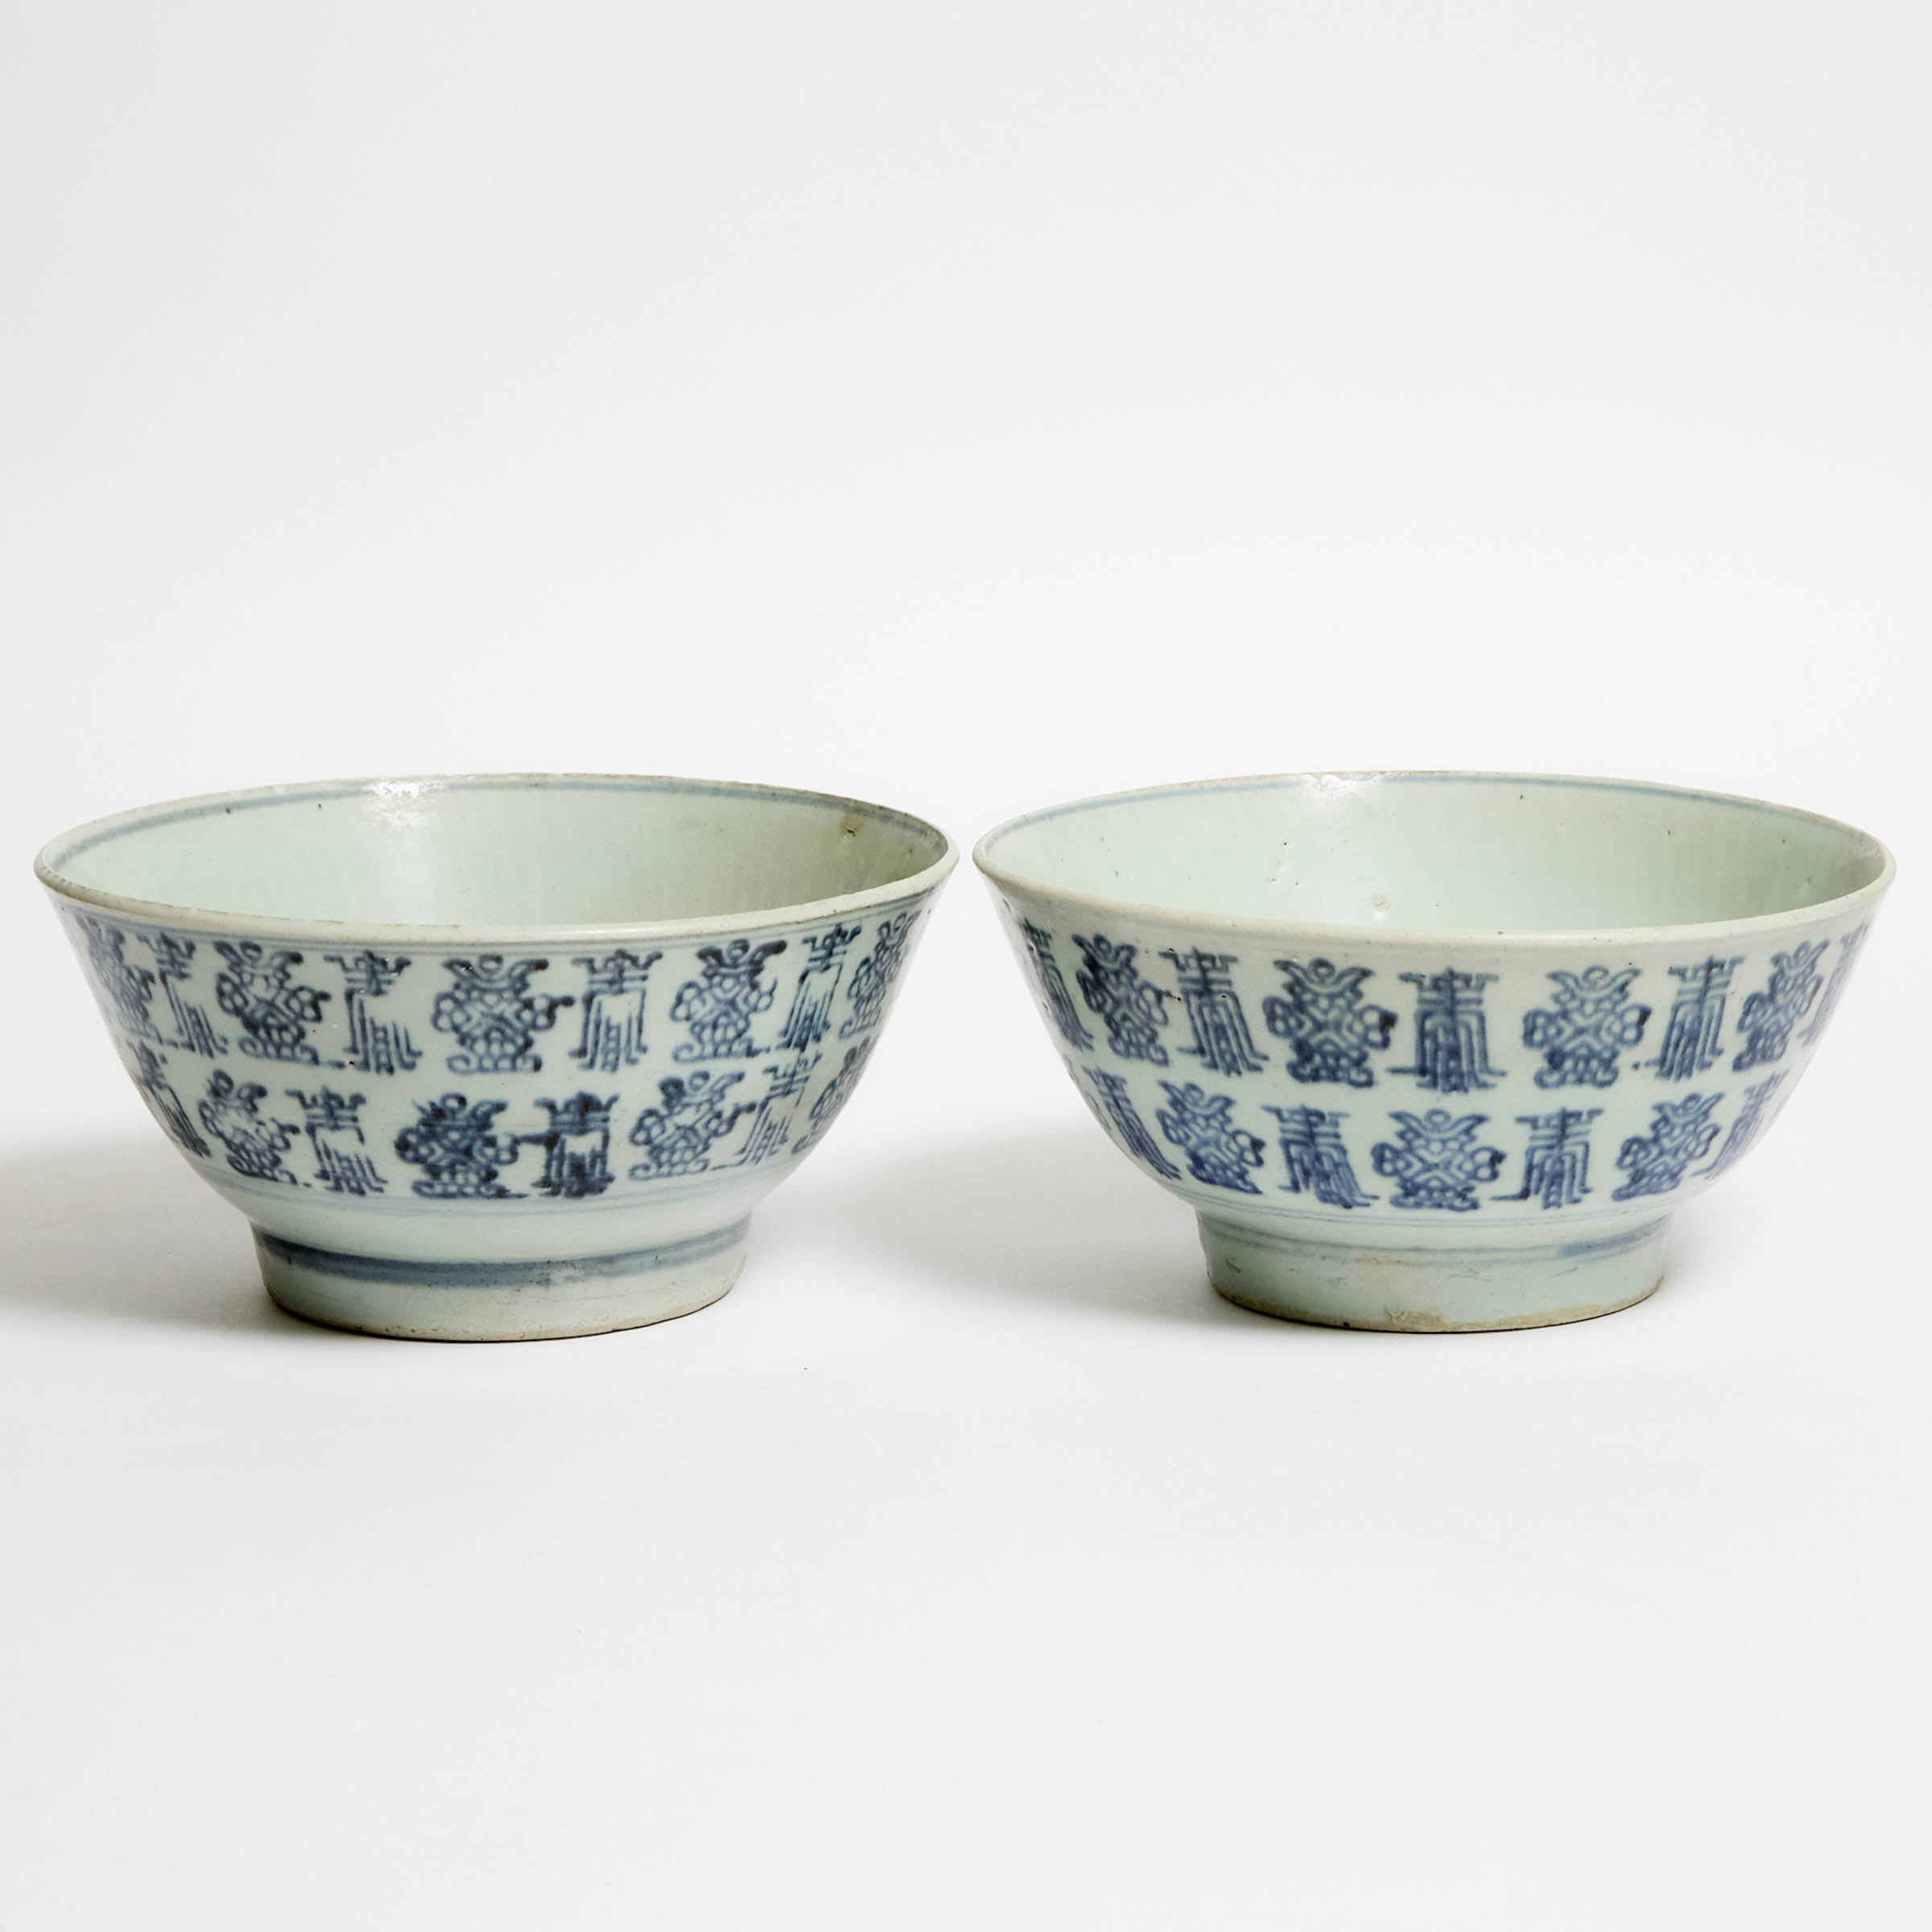 A Pair of Large Swatow Blue and White 'Auspicious Characters' Bowls, Ming Dynasty (1368-1644)